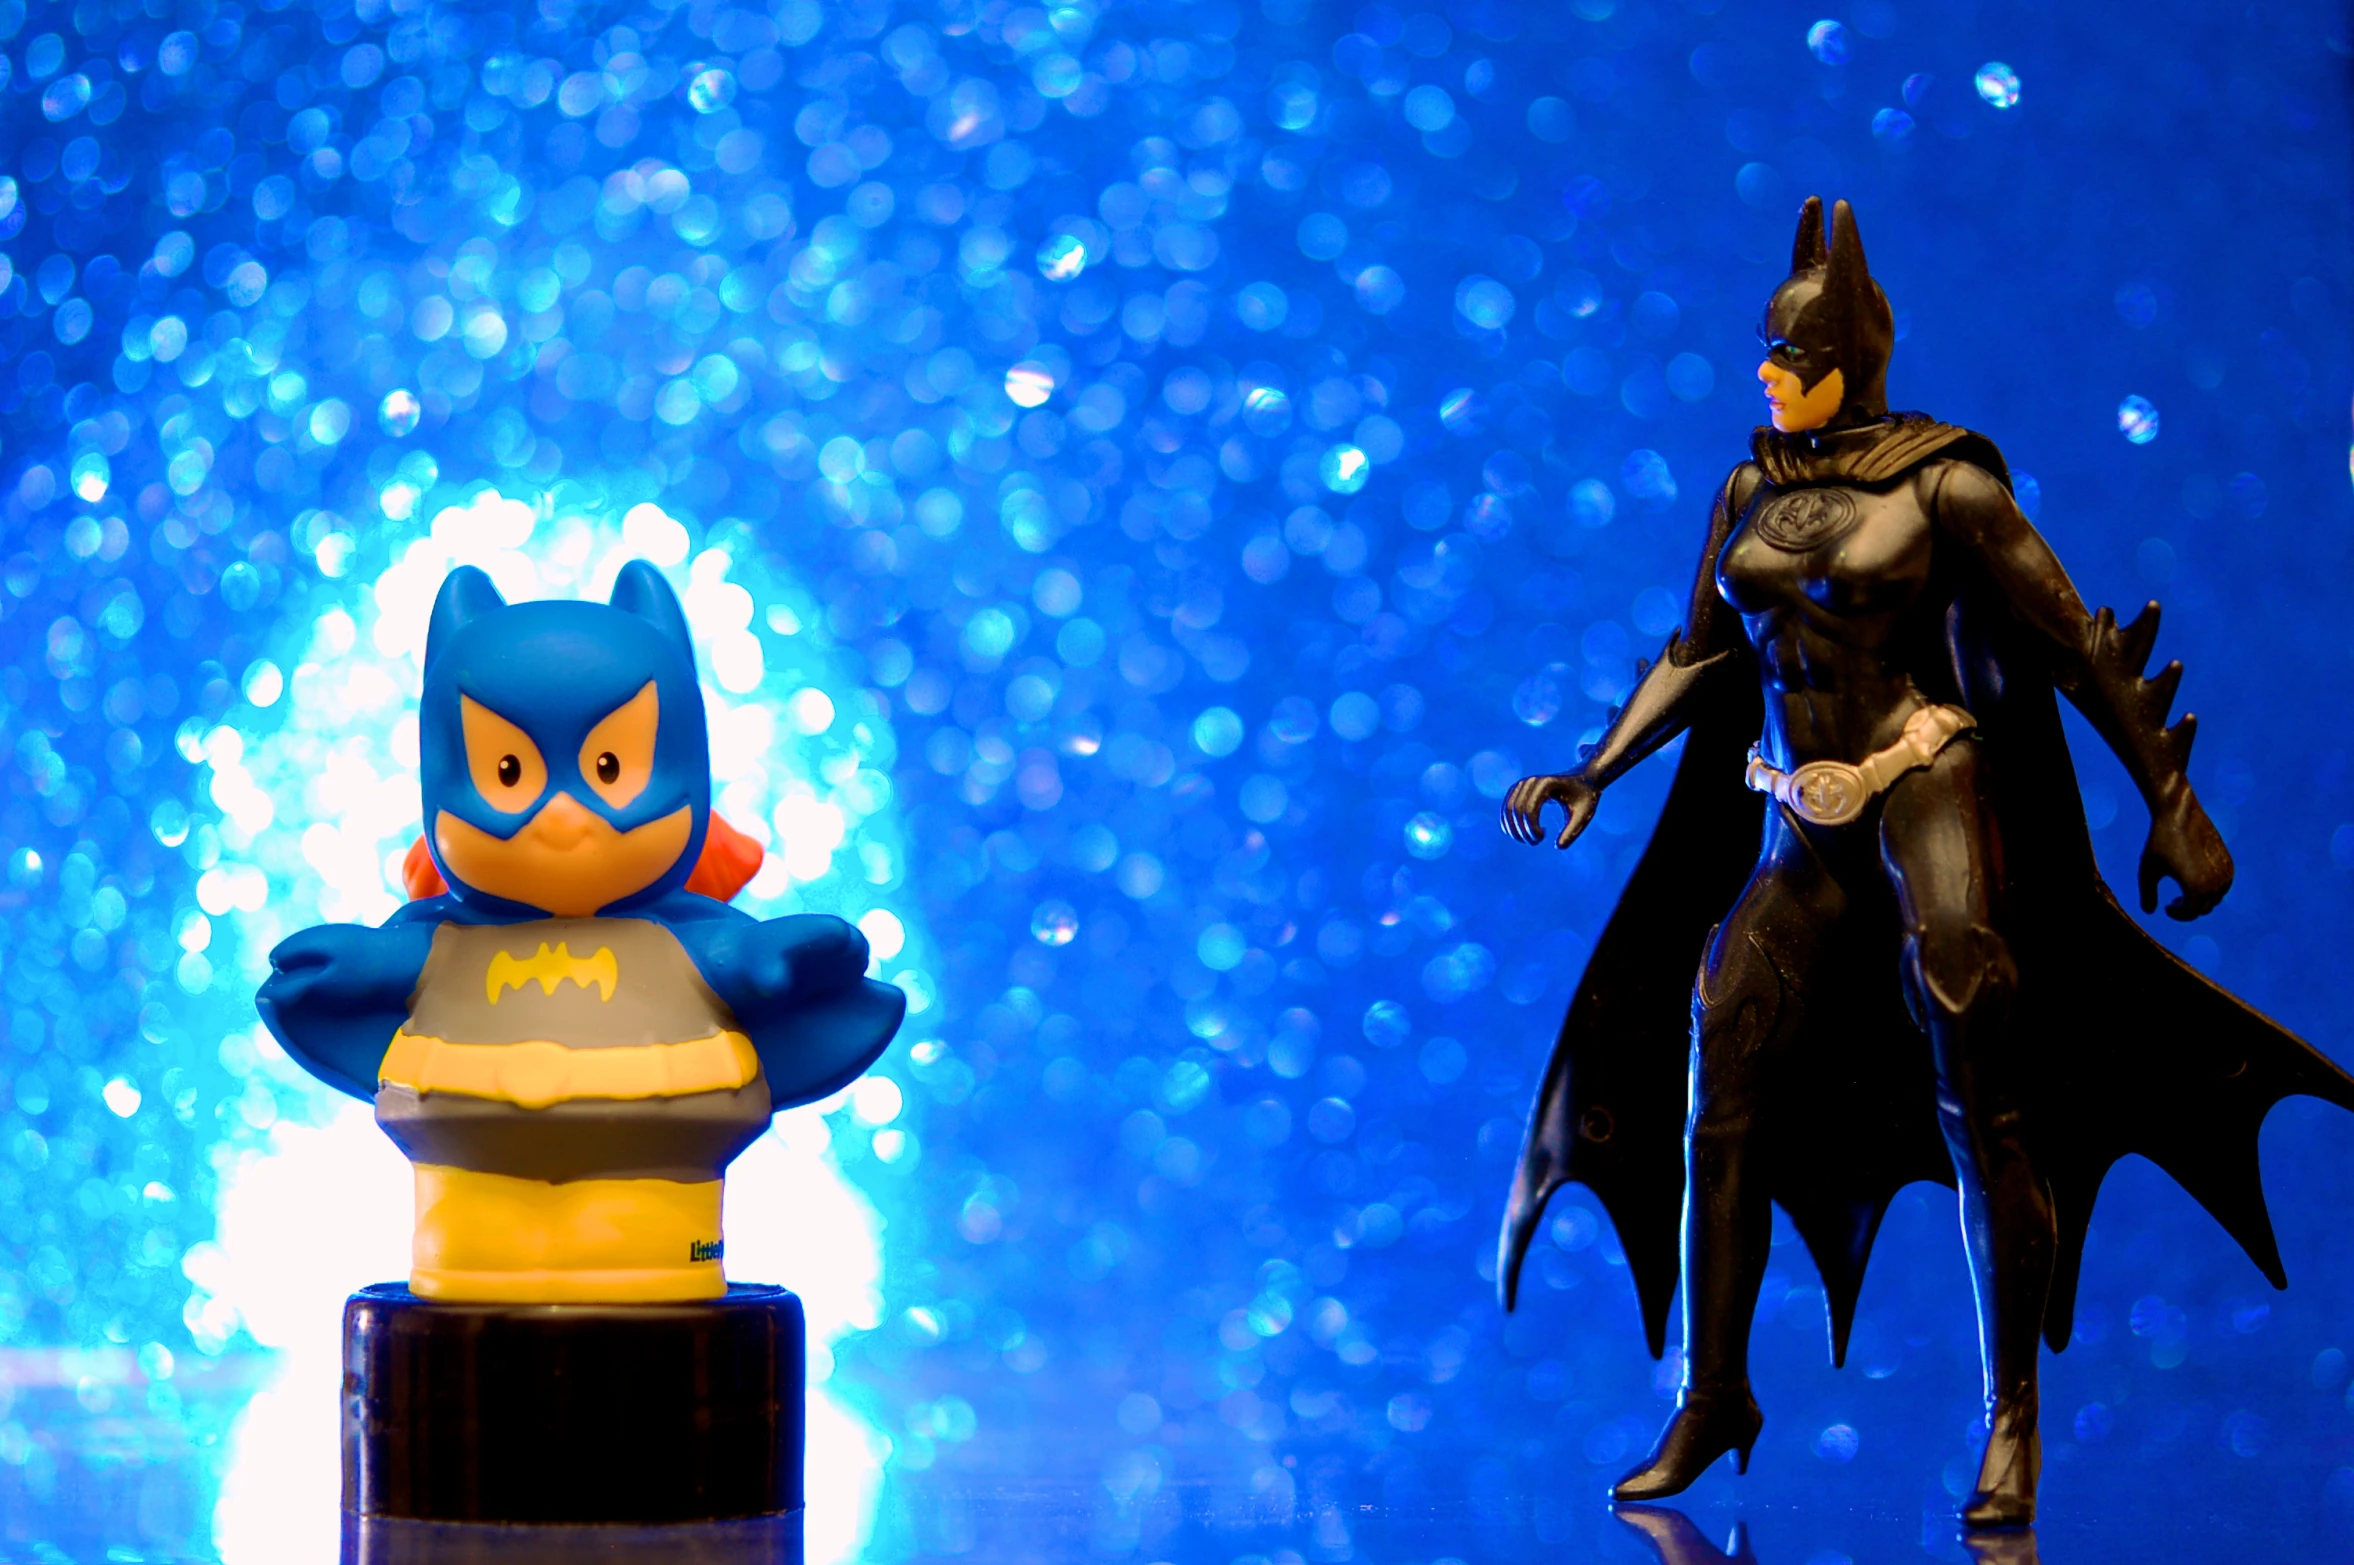 a batman and rubber duck figure posed side by side on a blue background